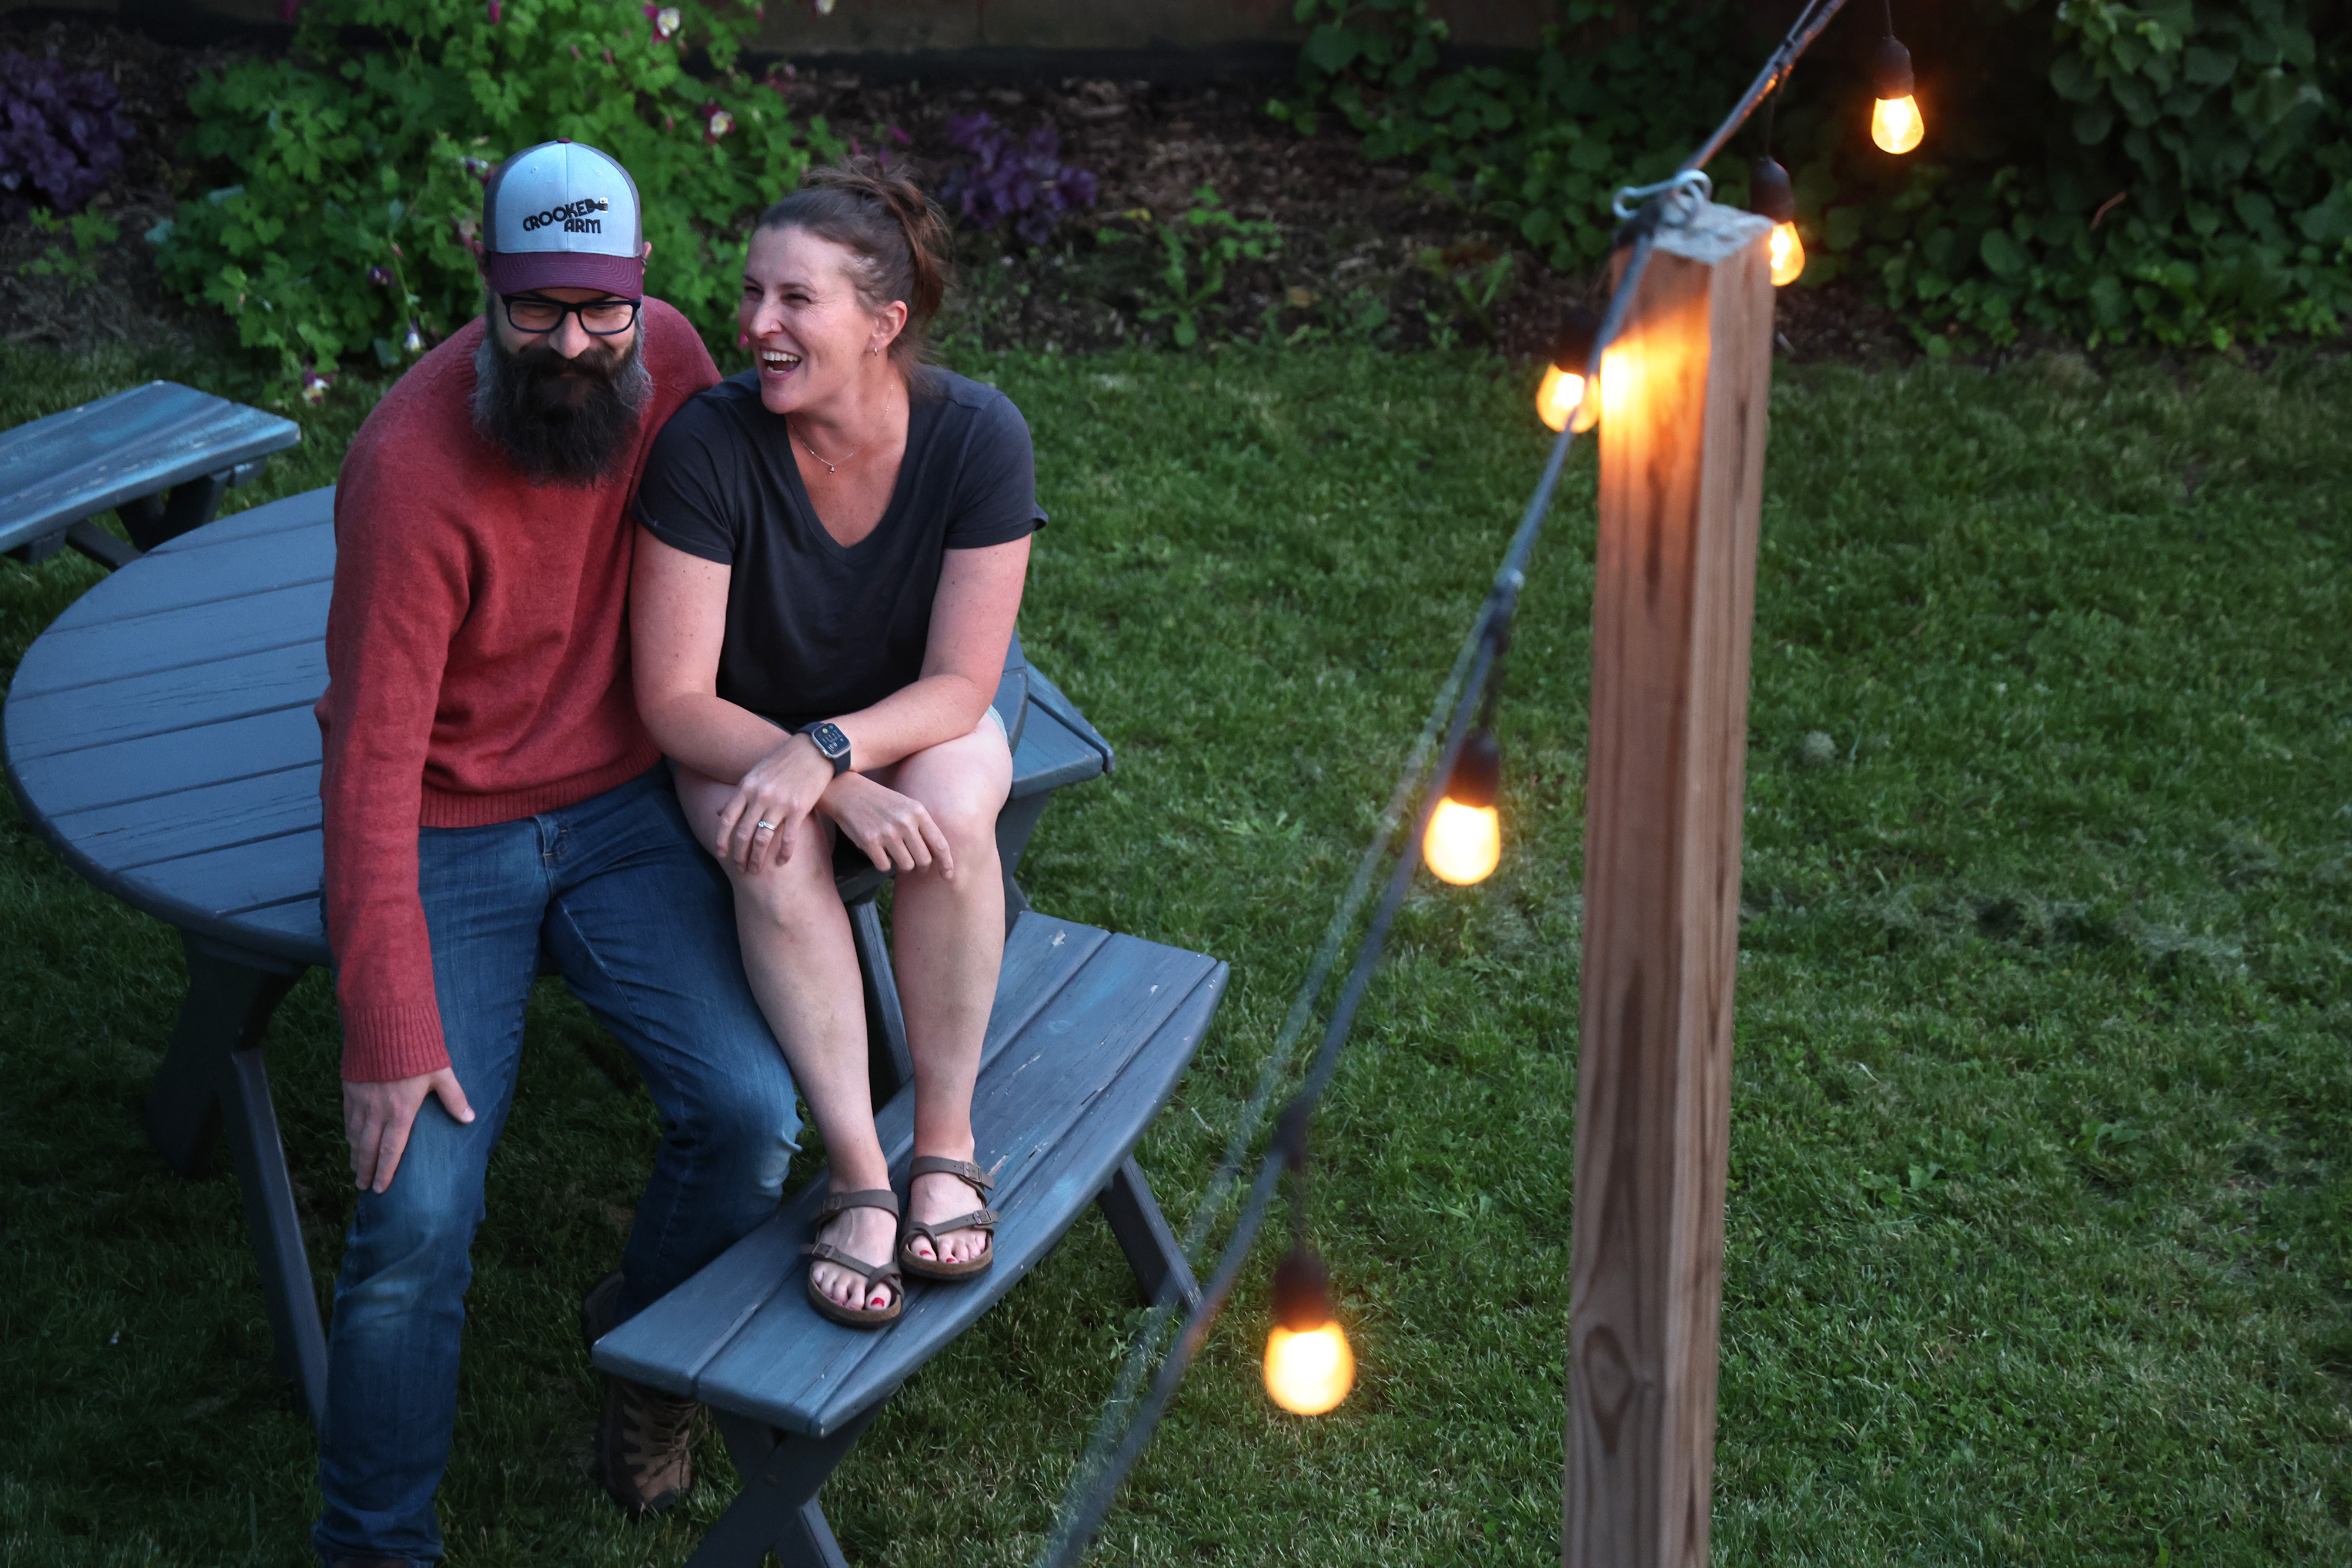 Sasha and Jason Darby, owners of Mapleton Barn, sit on a picnic table at the end of the evening following their Pizza Farm event on May 30, 2024, in Oconomowoc, Wisconsin. This is their sixth year teaming up with food vendor Flour Girl & Flame. Mapleton Barn provides the farm setting and Flour Girl & Flame bake the pizzas. (Stacey Wescott/Chicago Tribune)